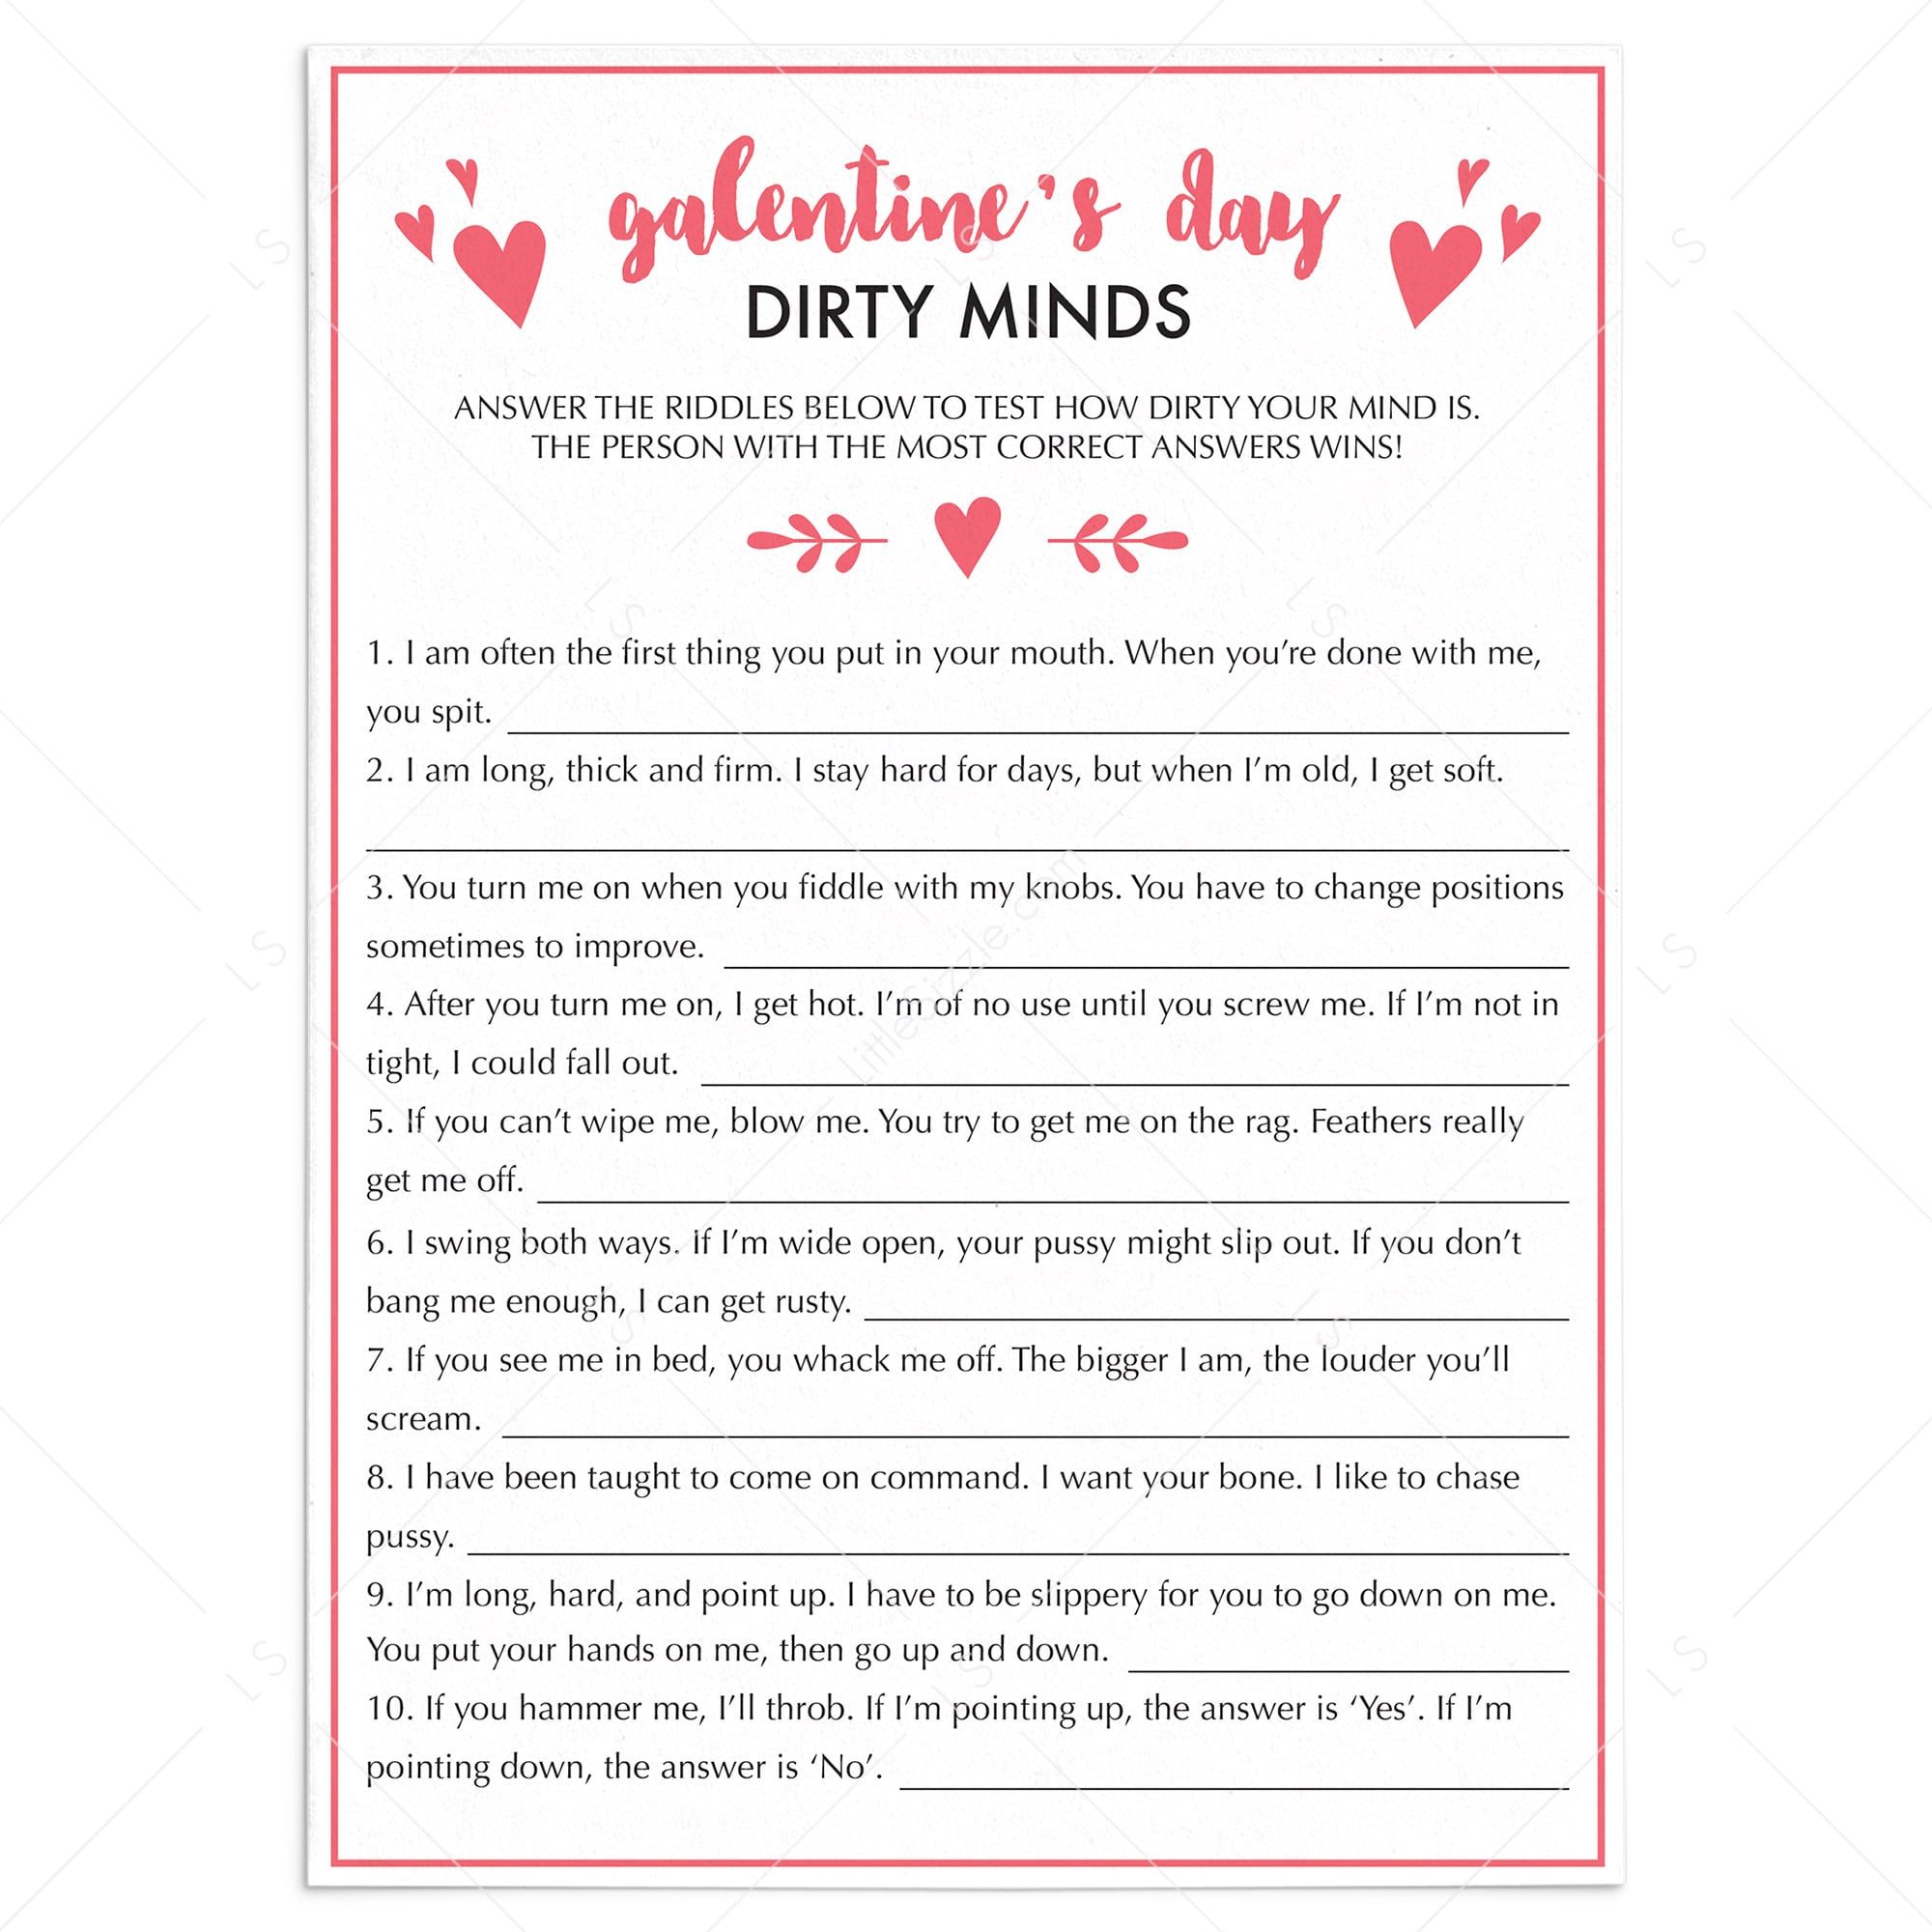 Dirty Minds Game for Adults Valentine's Day Party by LittleSizzle